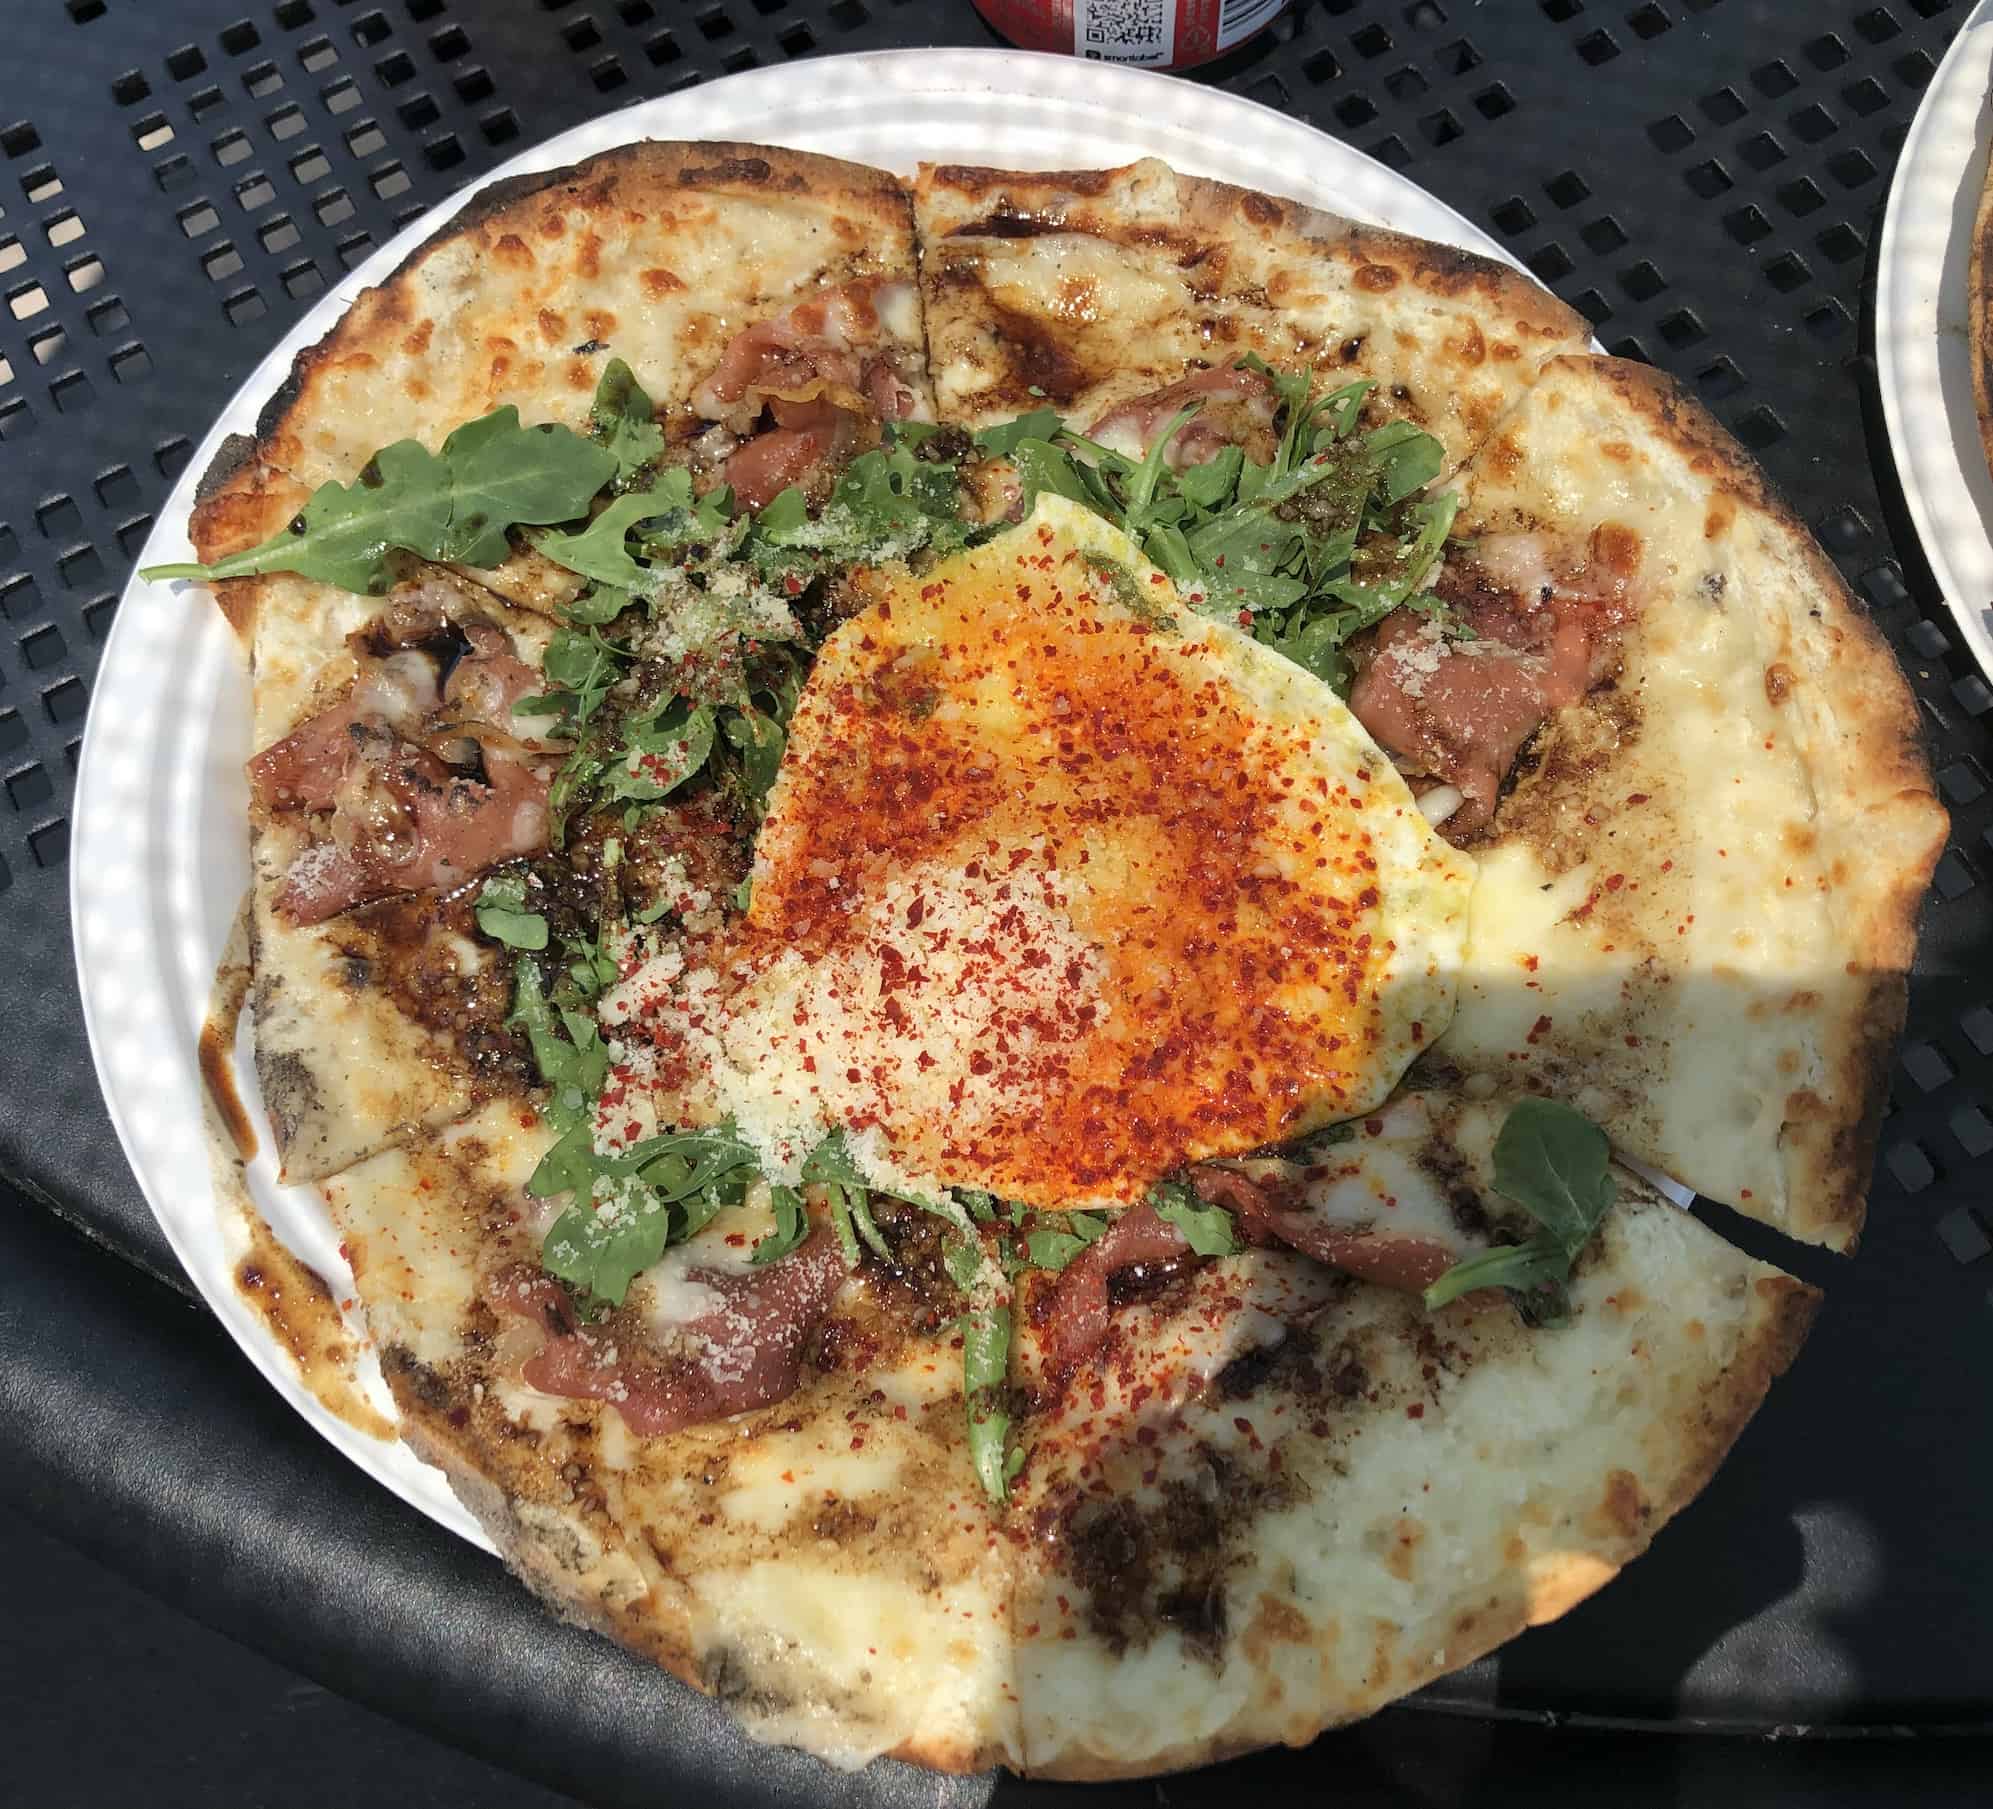 Prosciutto with arugula and a fried egg at The Rolling Stonebaker